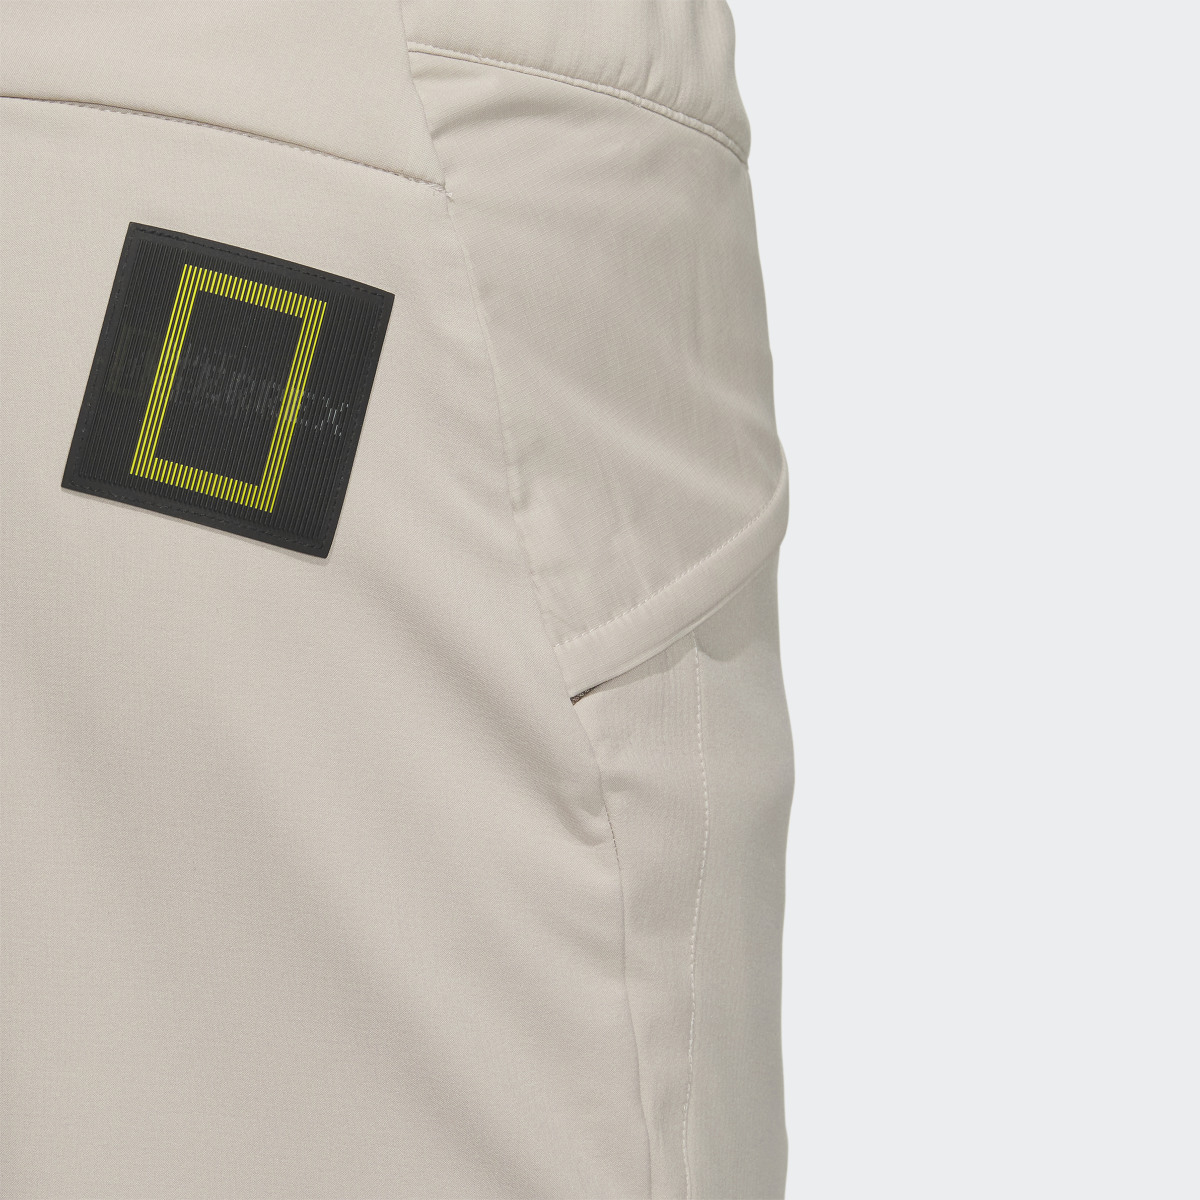 Adidas National Geographic Soft Shell Trousers. 6